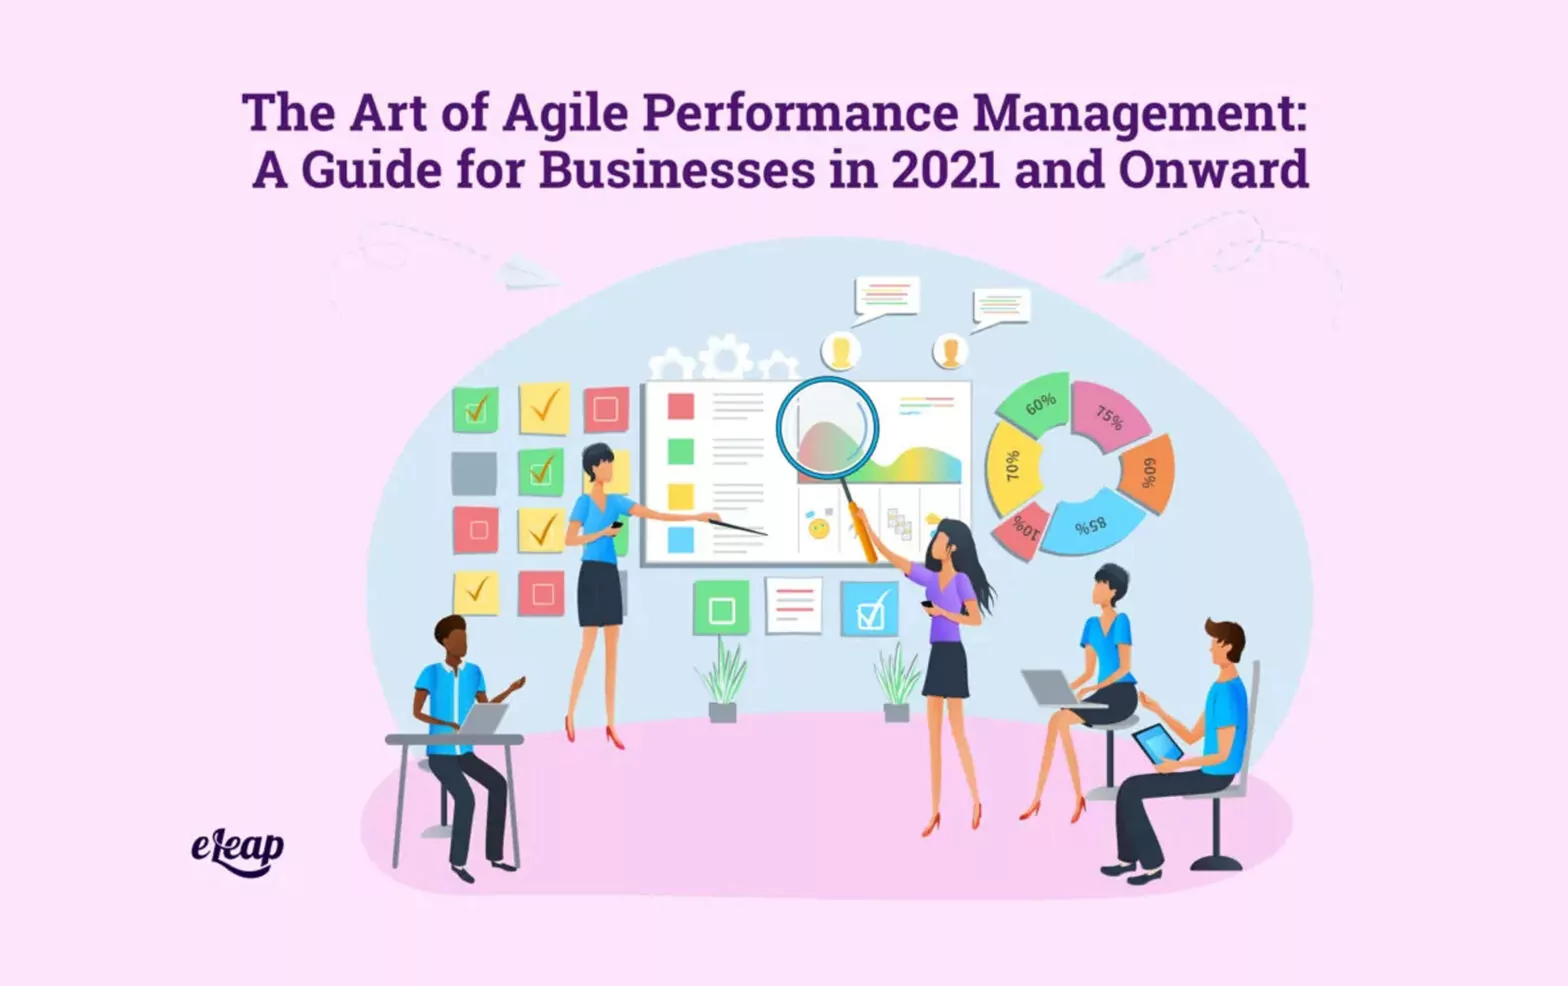 The Art of Agile Performance Management: A Guide for Businesses